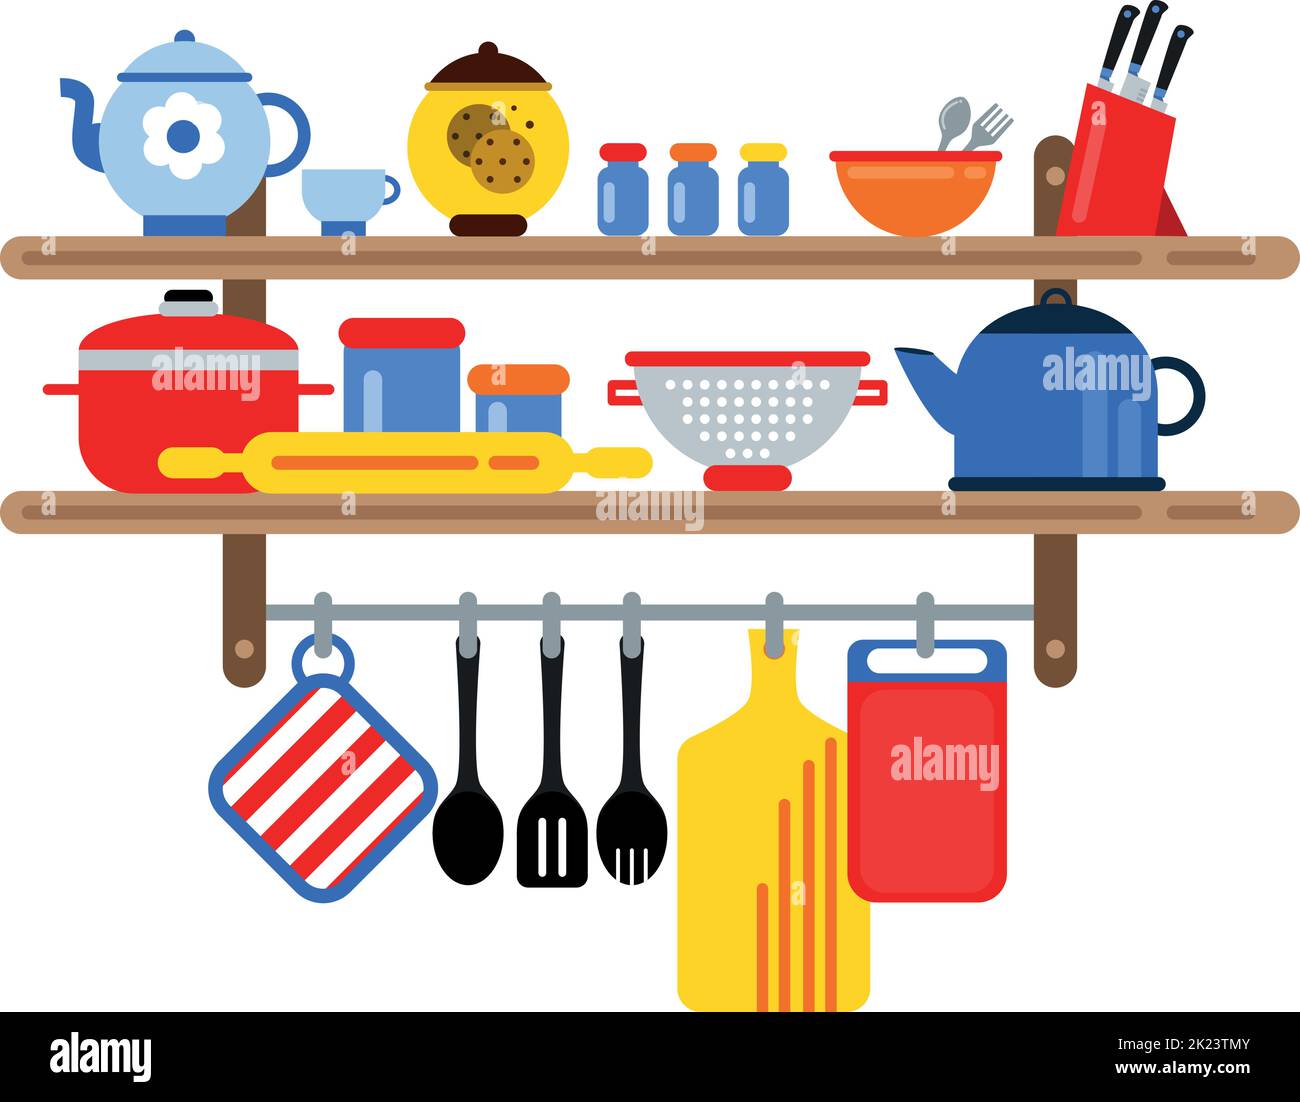 Kitchen shelves with dishes and tools. Cooking equipment Stock Vector